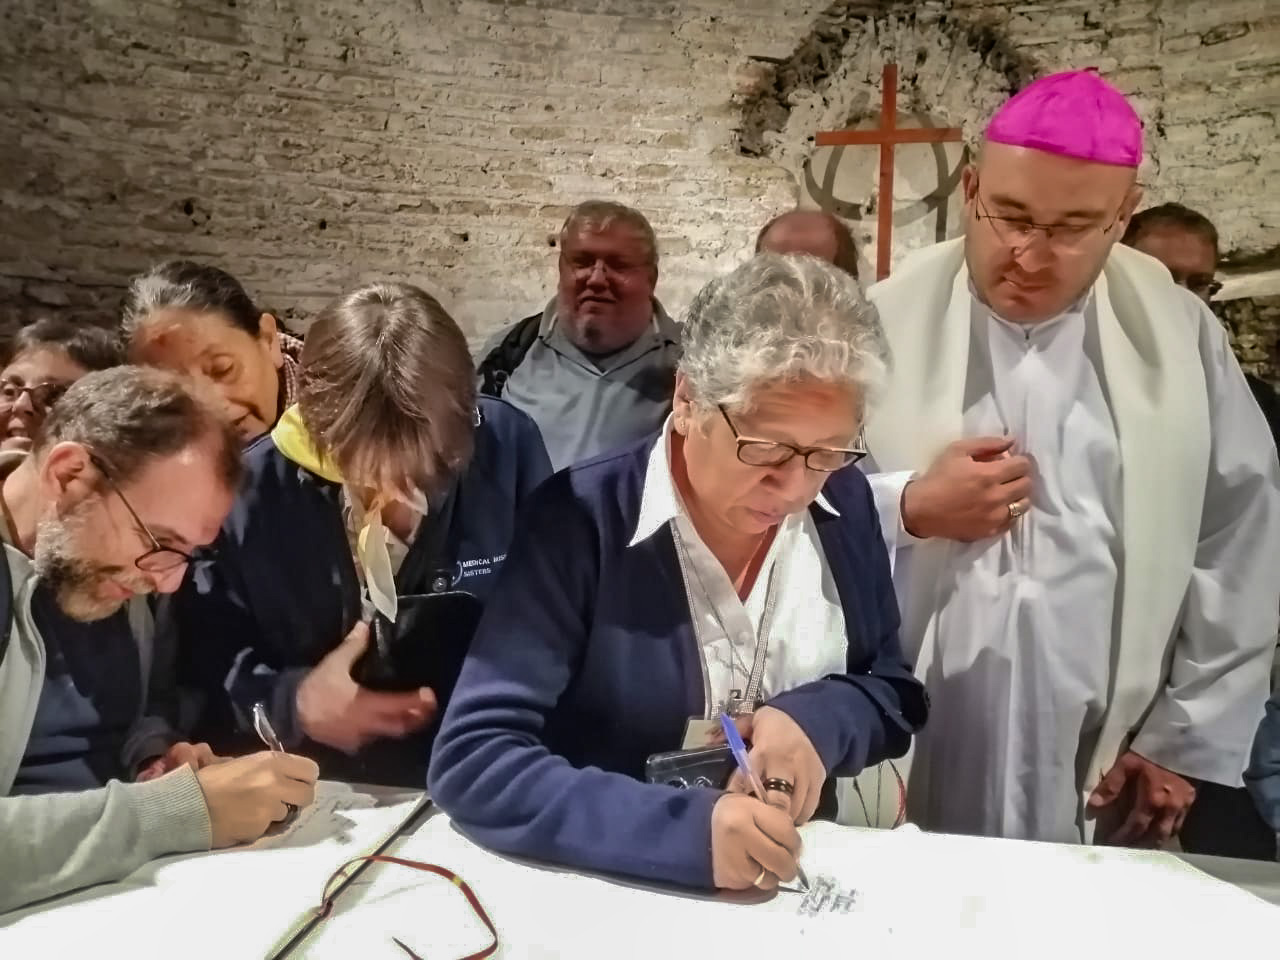 Dominican Sr. Zully Rojas Quispe at the Catacombs of Domitilla in Rome, signs the "Pact of the Catacombs for the Common Home" along with some of the participants of the synod for the Amazon held in October 2019. (Courtesy of Zully Rojas Quispe)